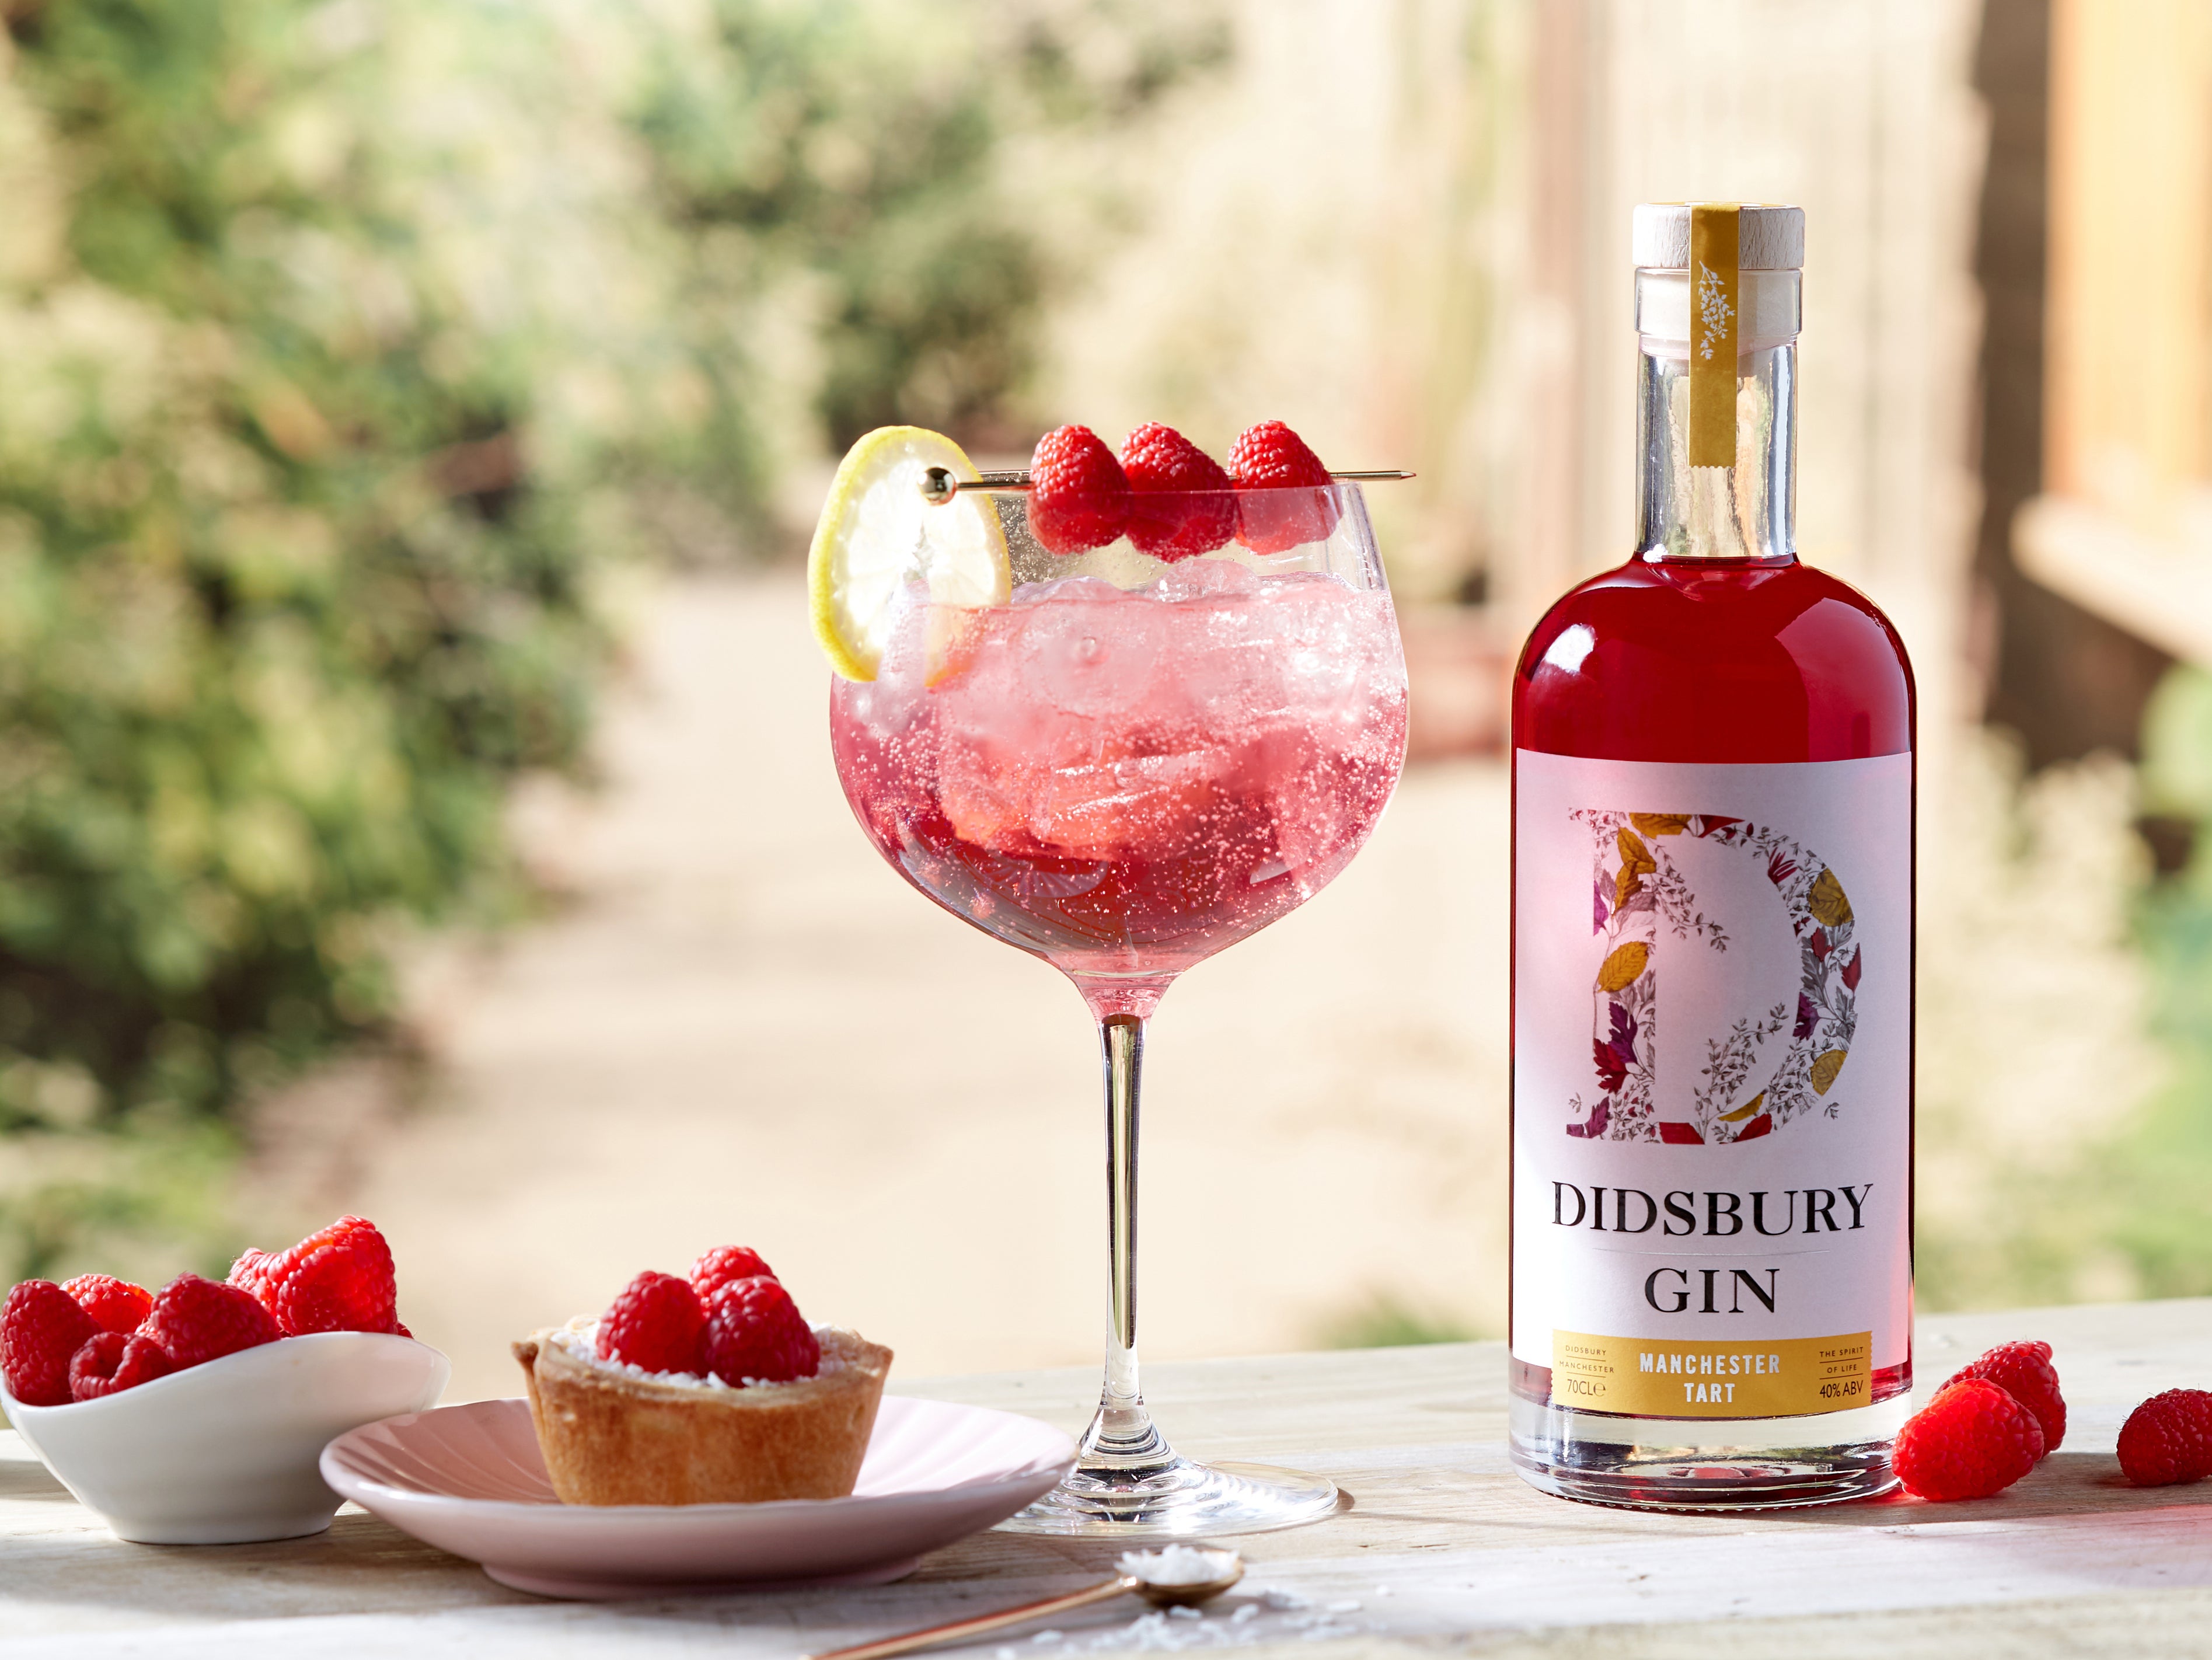 Didsbury Gin’s turnover as of January 2021 has grown to £3.5m